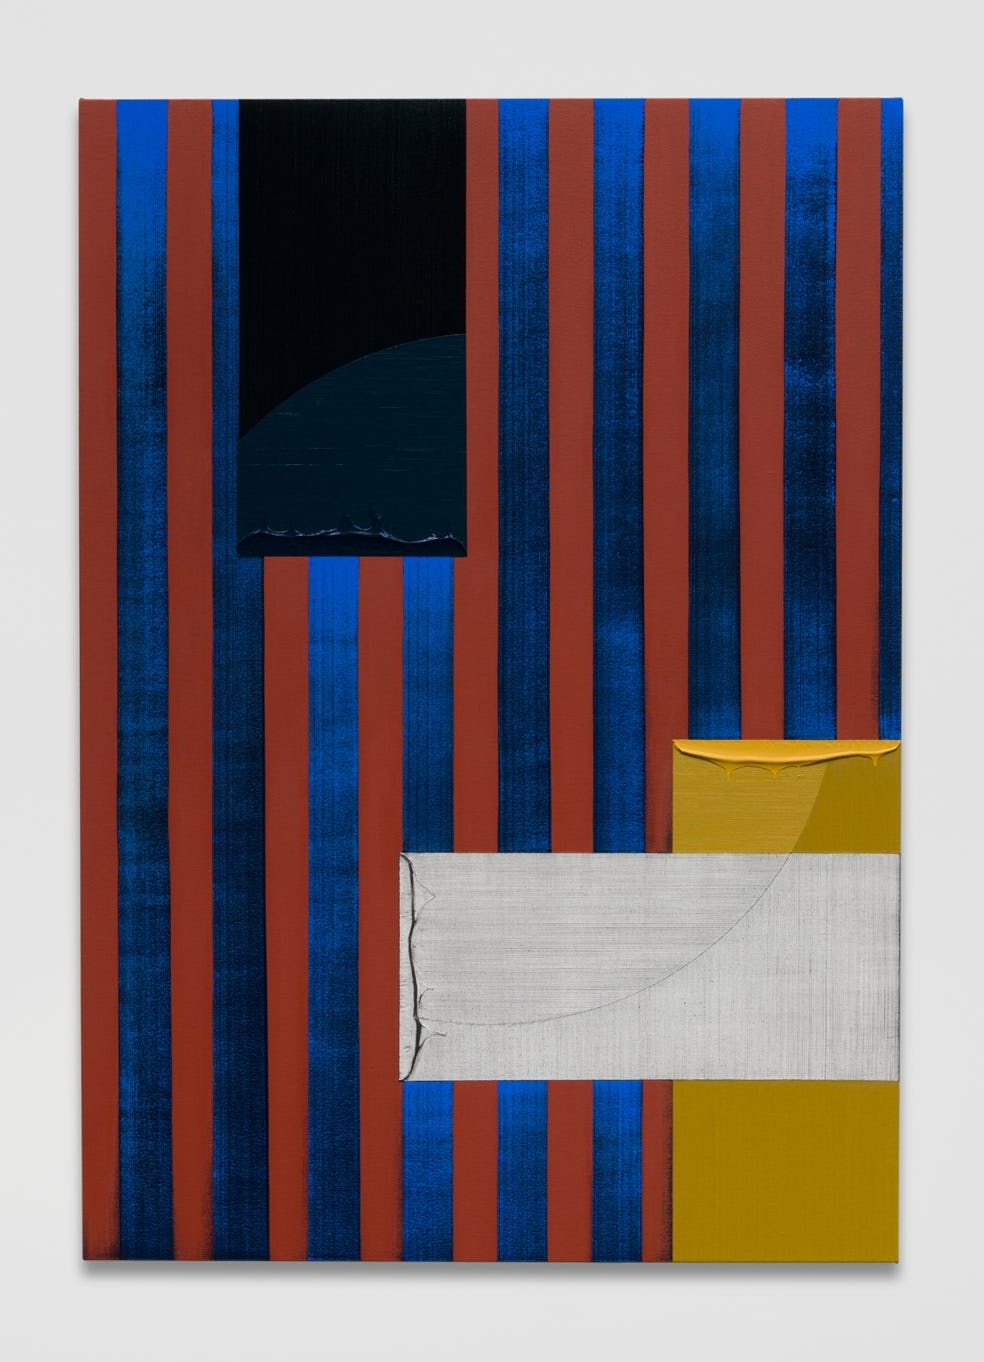 Alex Olson
Sightlines (4) (2018)
Oil and modeling paste on canvas
51h × 36w inches (129.54h × 91.44w cm)